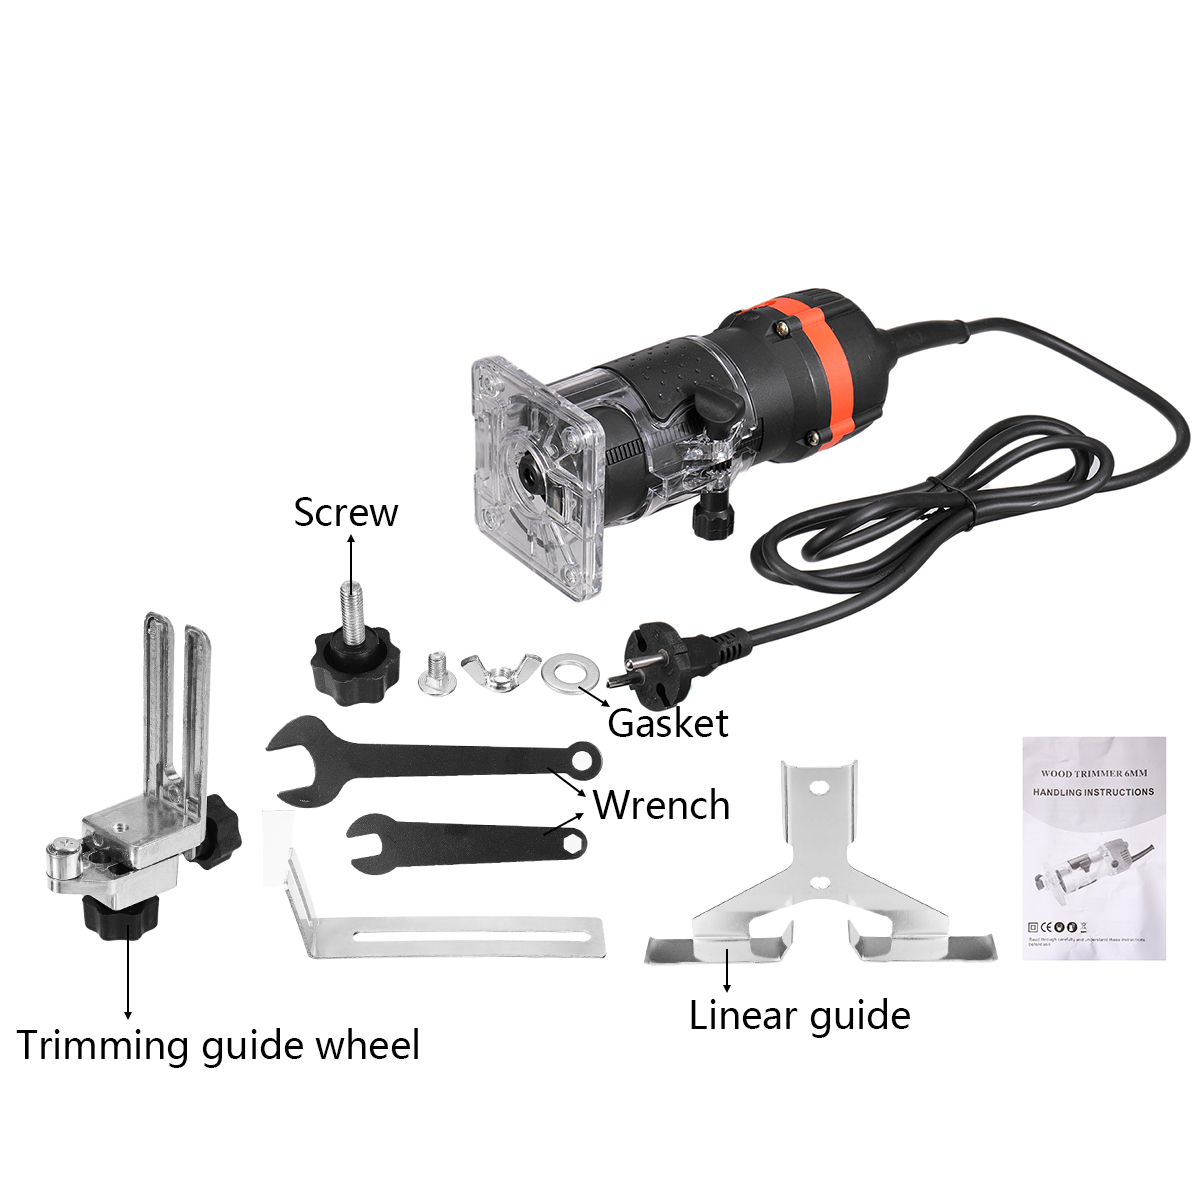 1000W-Woodworking-Trimmer-Electric-Trimming-Machine-Wood-Milling-Slotting-Machine-1781394-10